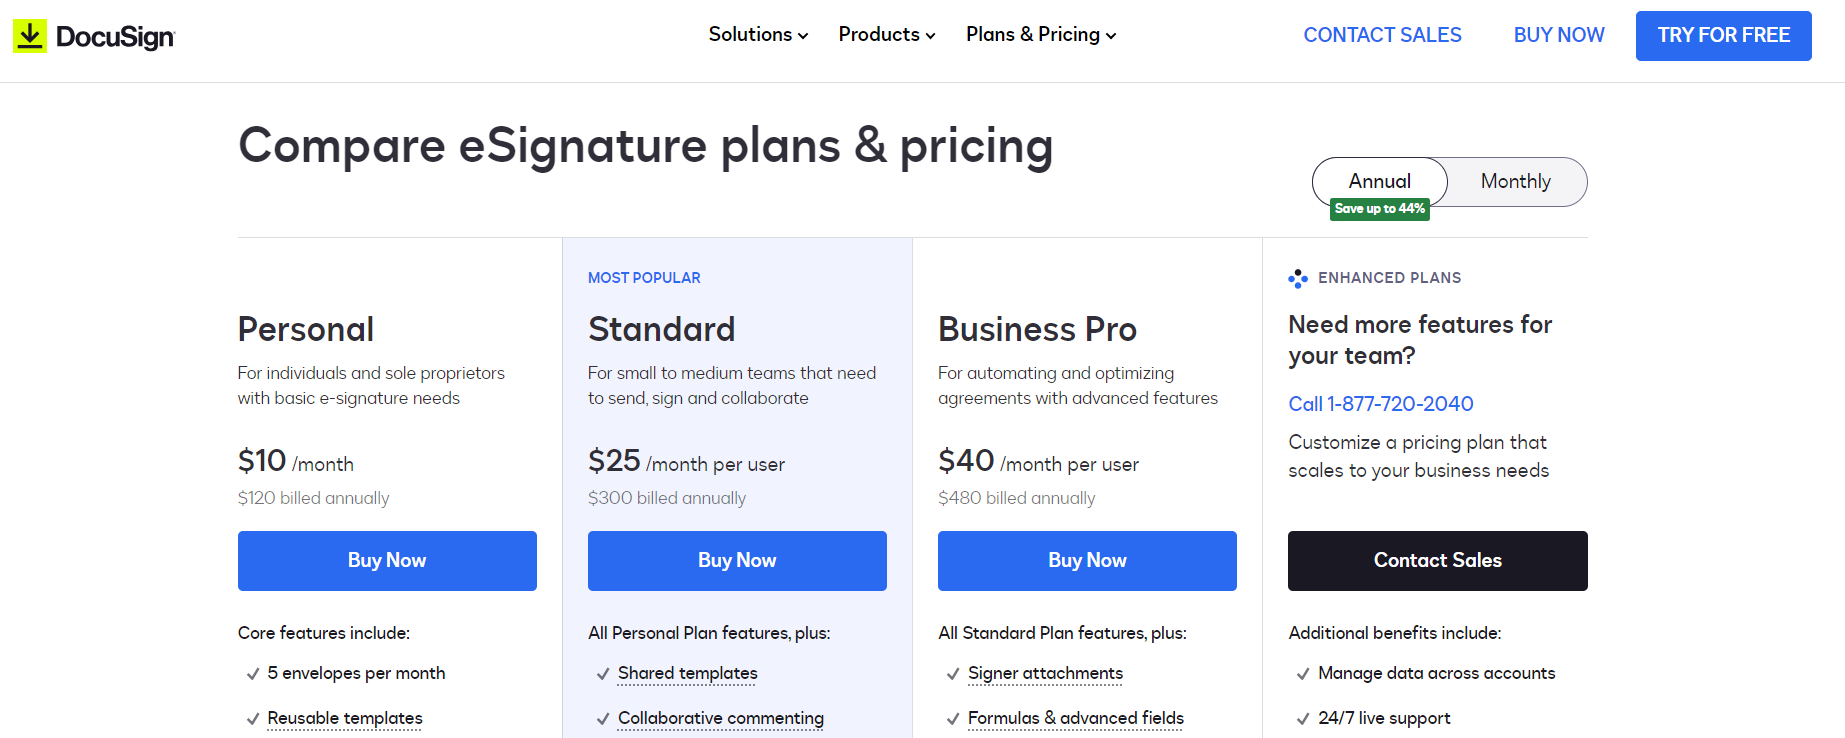 DocuSign subscription plans and pricing